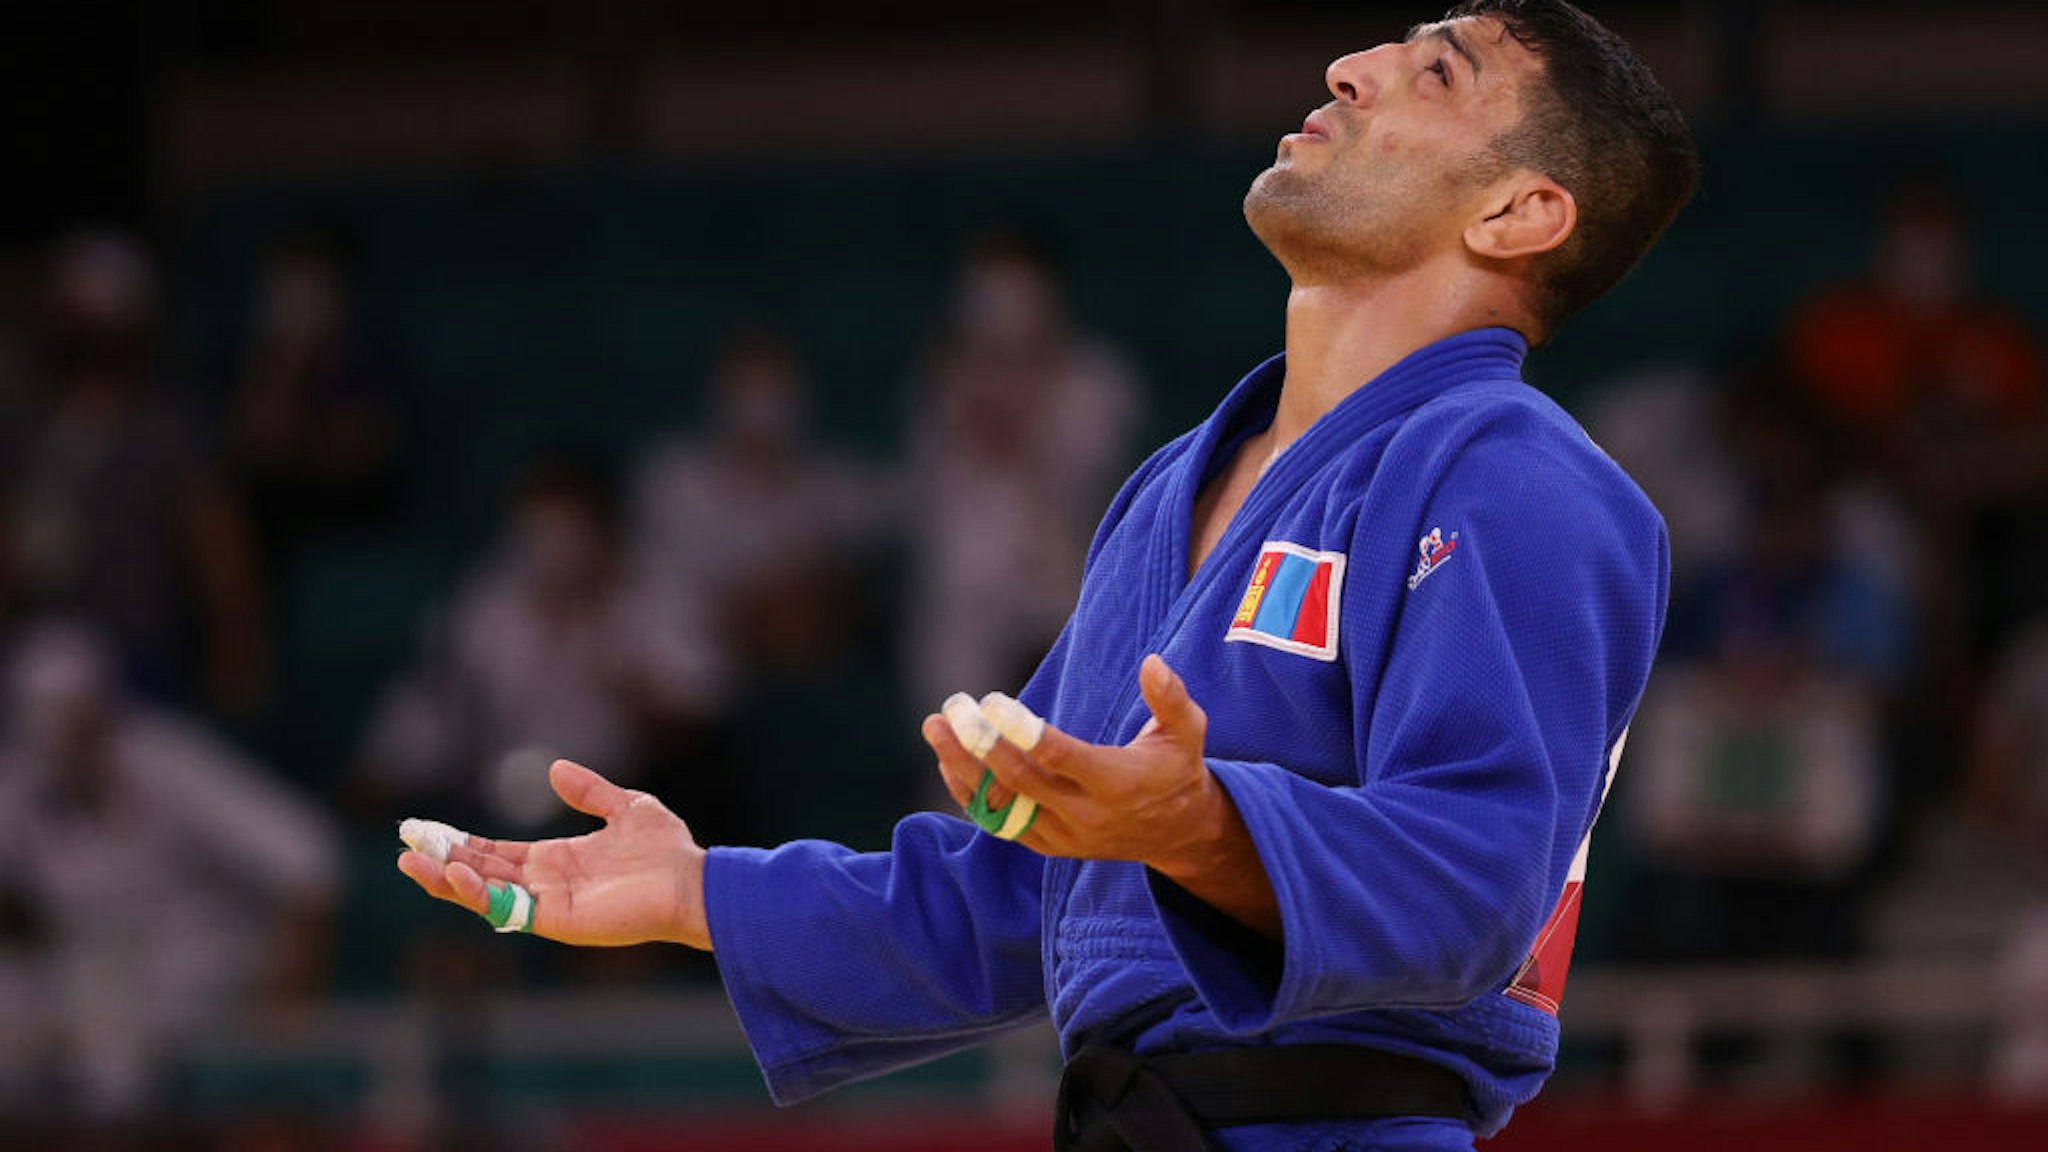 TOKYO, JAPAN - JULY 27: Saeid Mollaei of Team Mongolia reacts after he defeated Shamil Borchashvili of Team Austria during the Men’s Judo 81kg Semifinal of Table B on day four of the Tokyo 2020 Olympic Games at Nippon Budokan on July 27, 2021 in Tokyo, Japan. (Photo by Harry How/Getty Images)